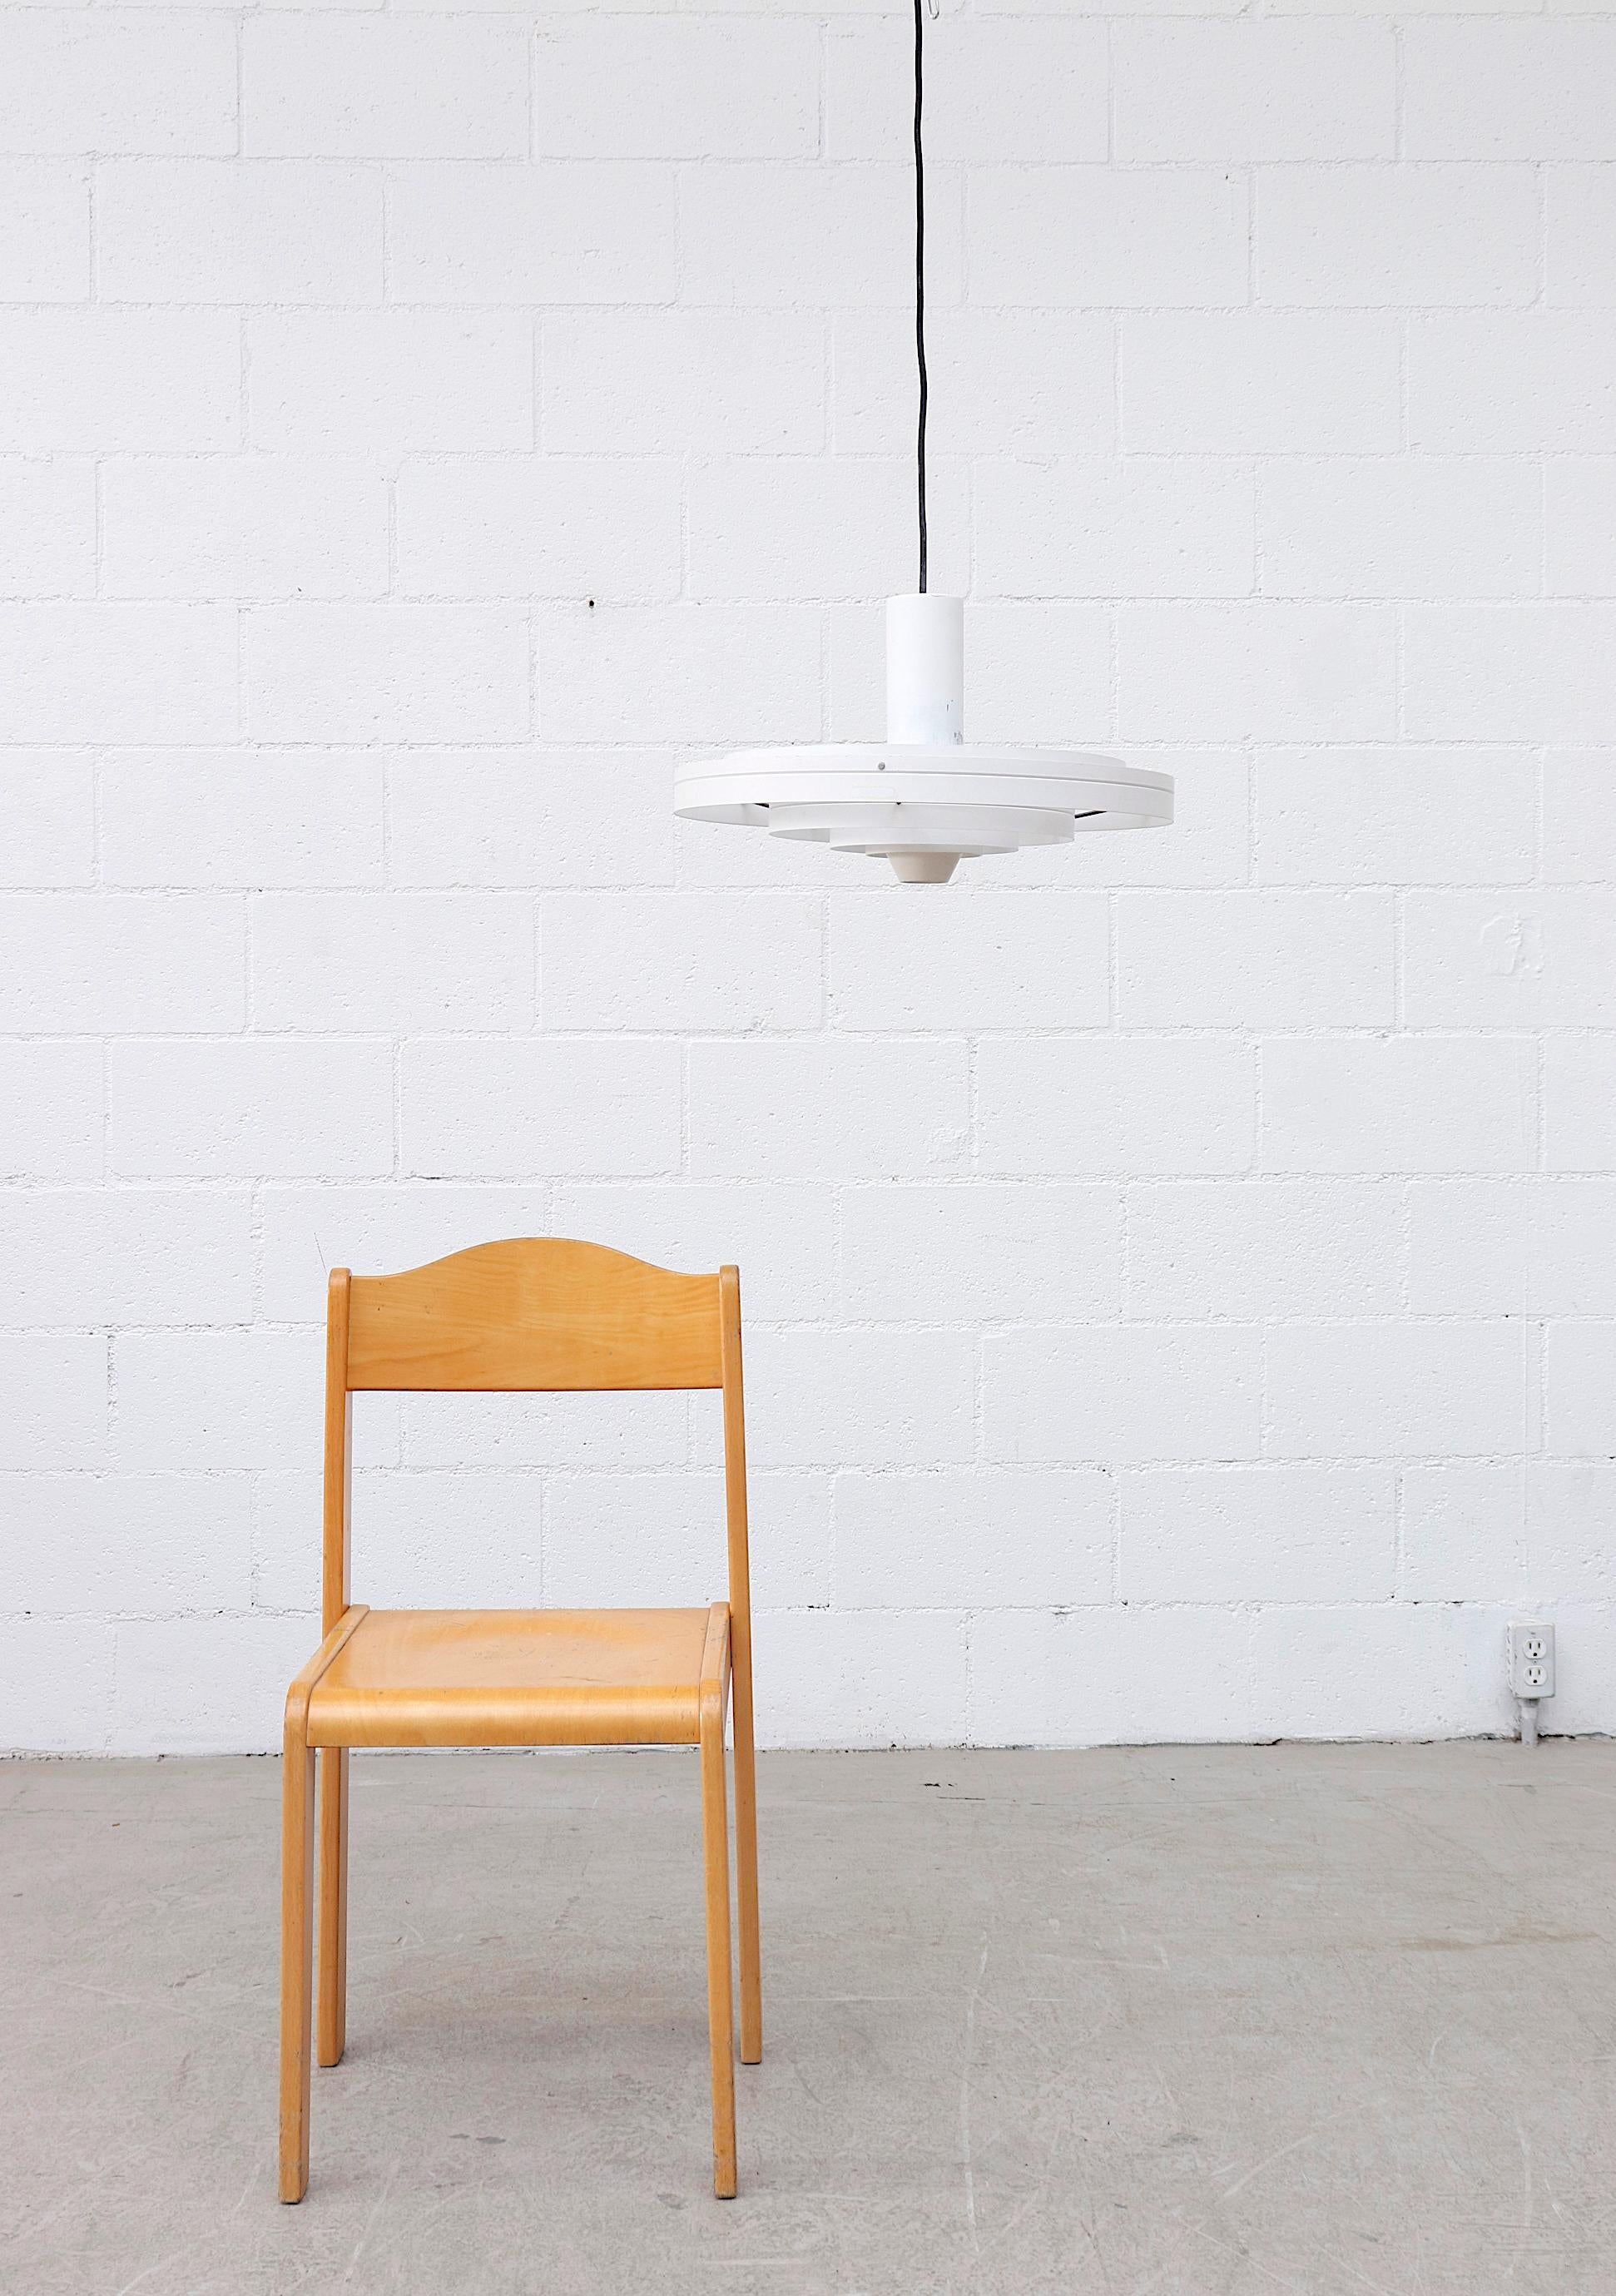 Award-Winning 'Fibonacci' UFO pendant light with white enameled with black enameled metal accents by Sophus Frandsen for Fog & Mørup, Denmark, 1963. In original condition with visible wear and scratching, consistent with its age and usage.